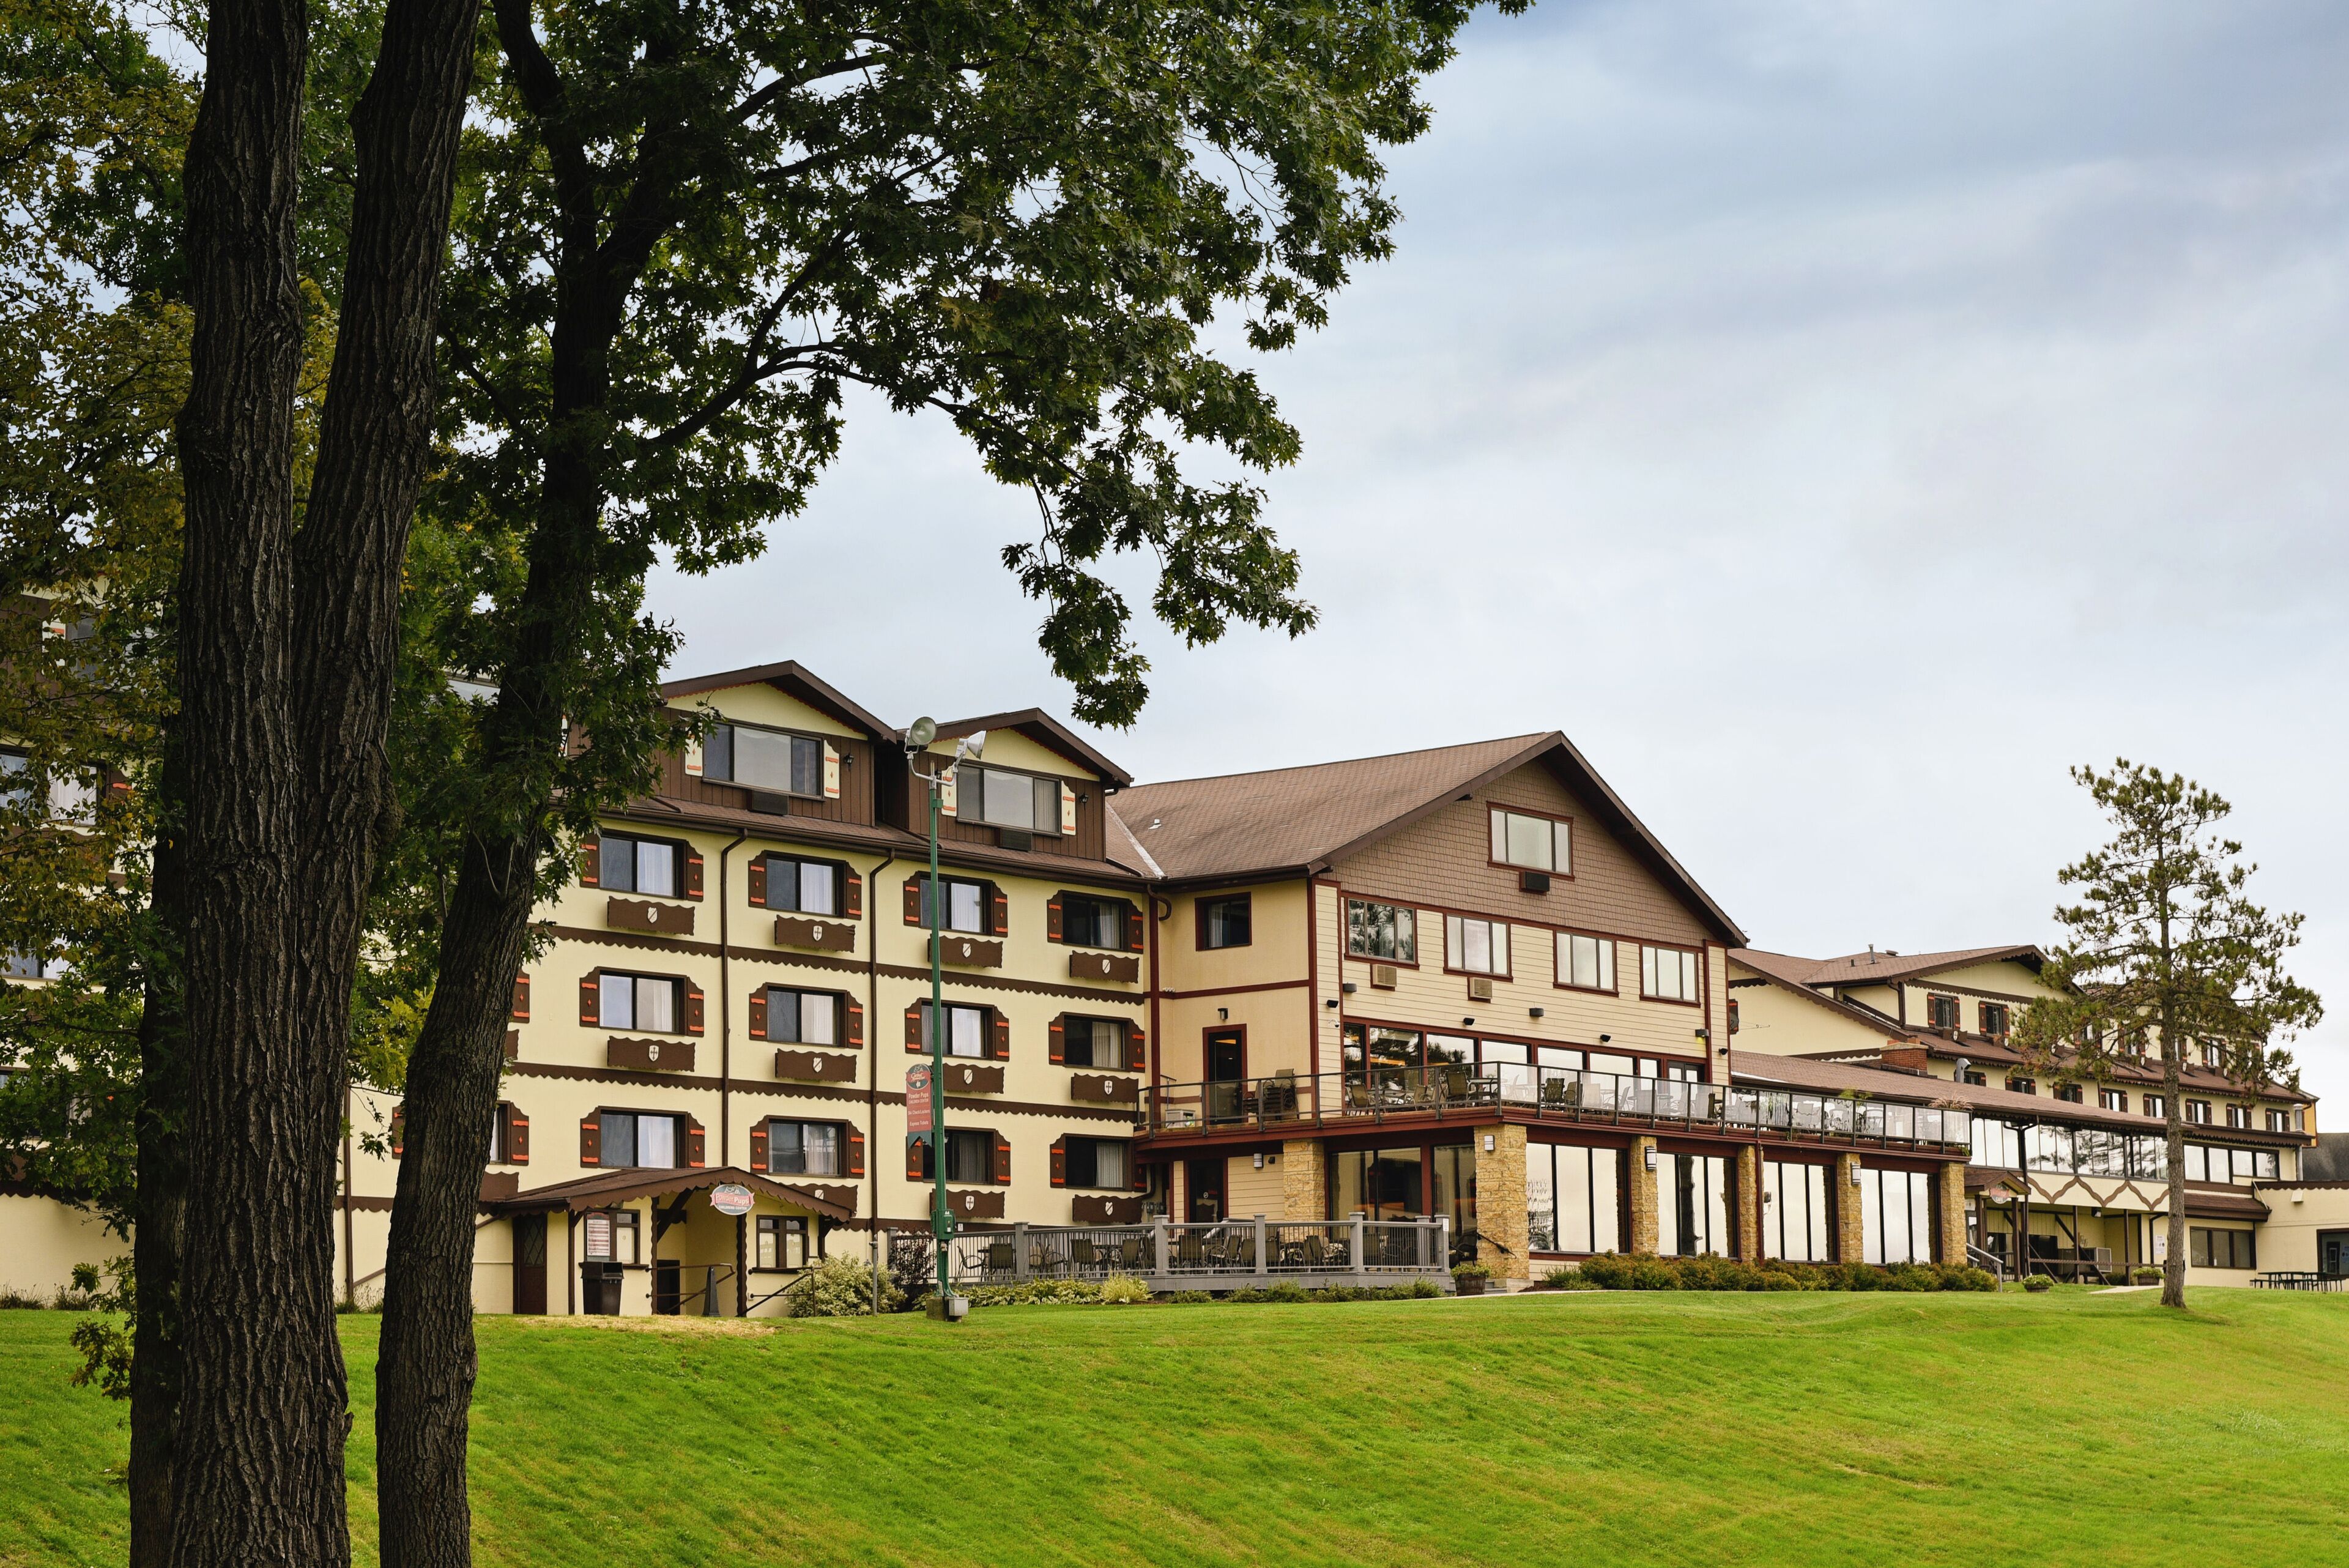 Building view of Chestnut Mountain Resort